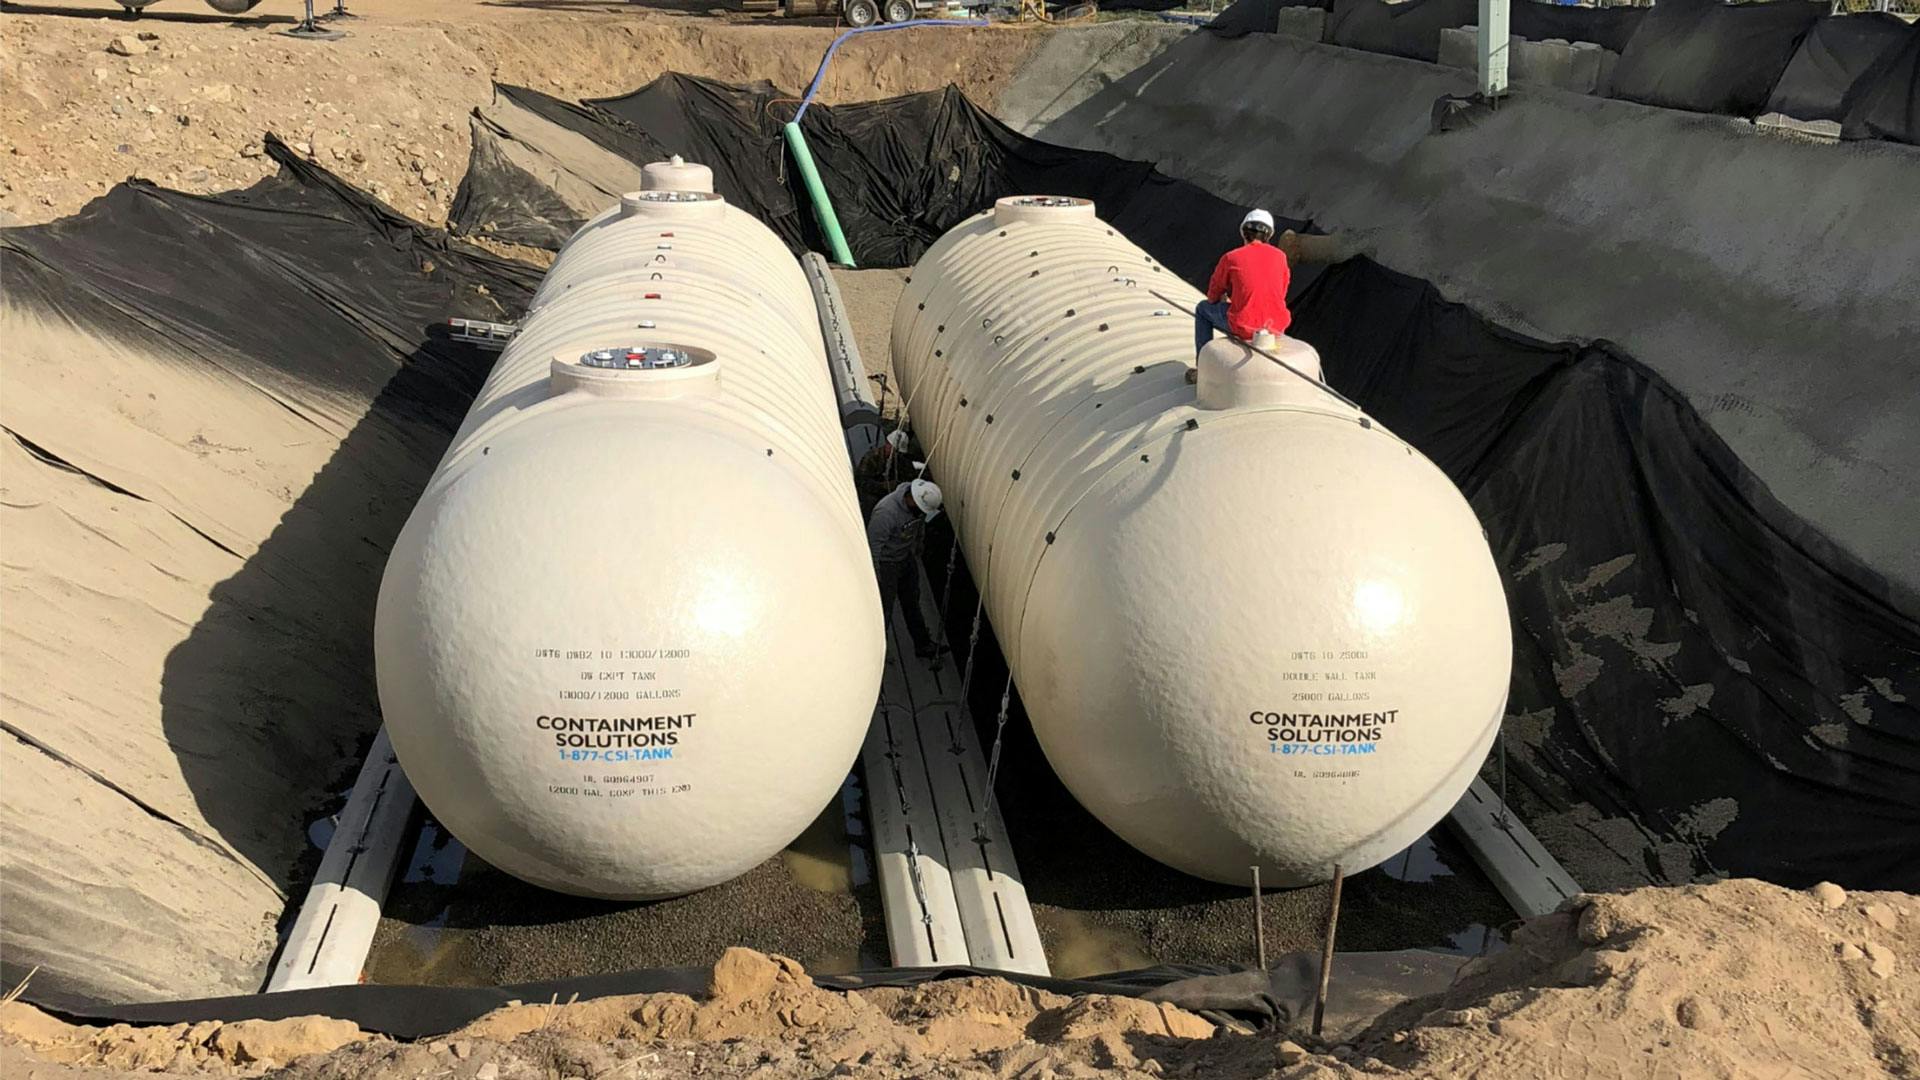 Two fiberglass tanks on job site with worker on top of tank.